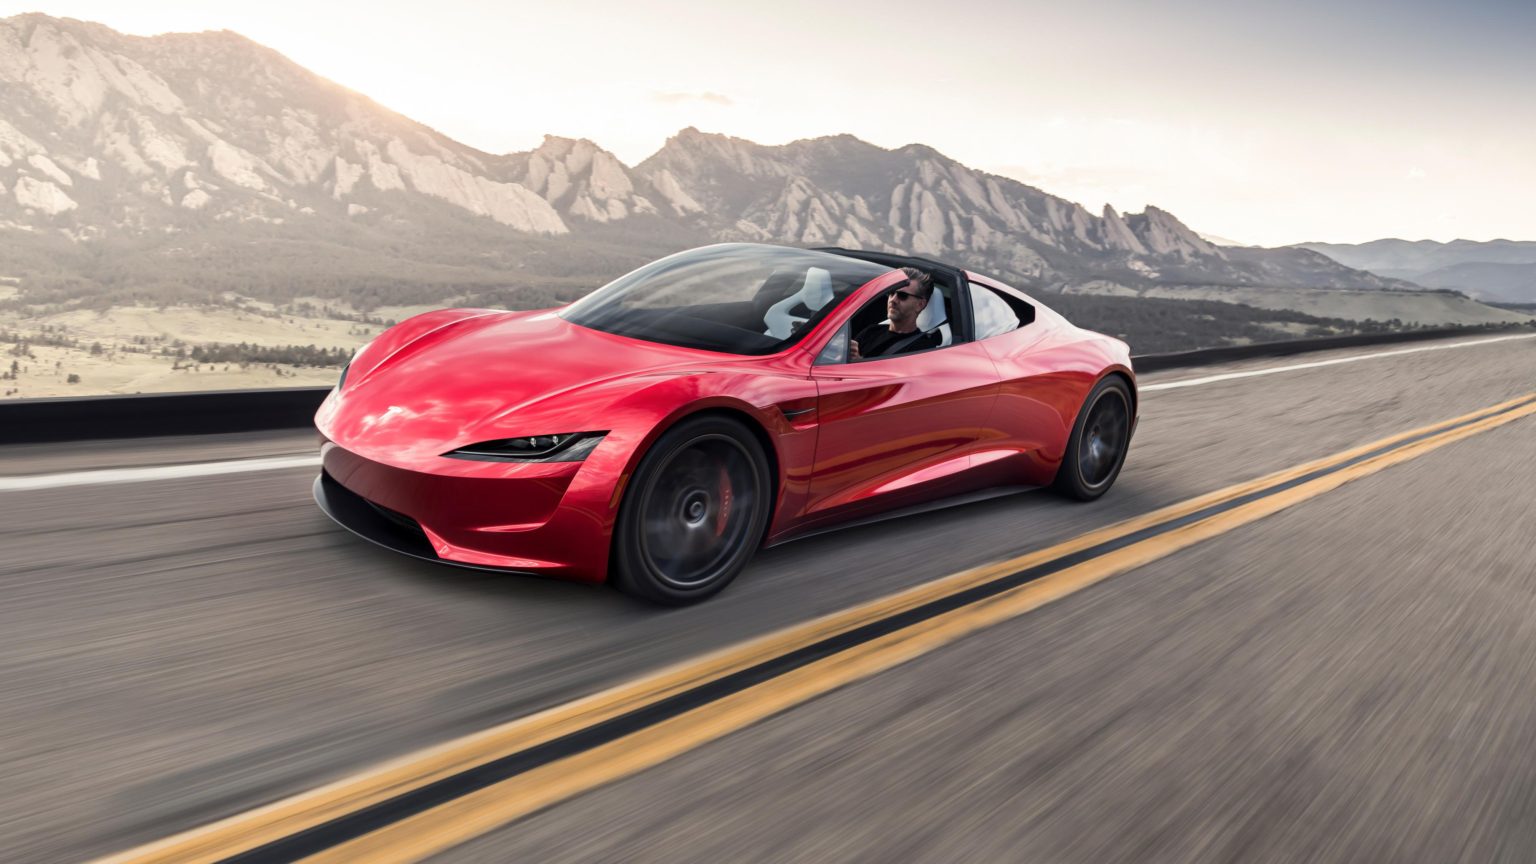 The Roadster's specs are impressive, to say the least.